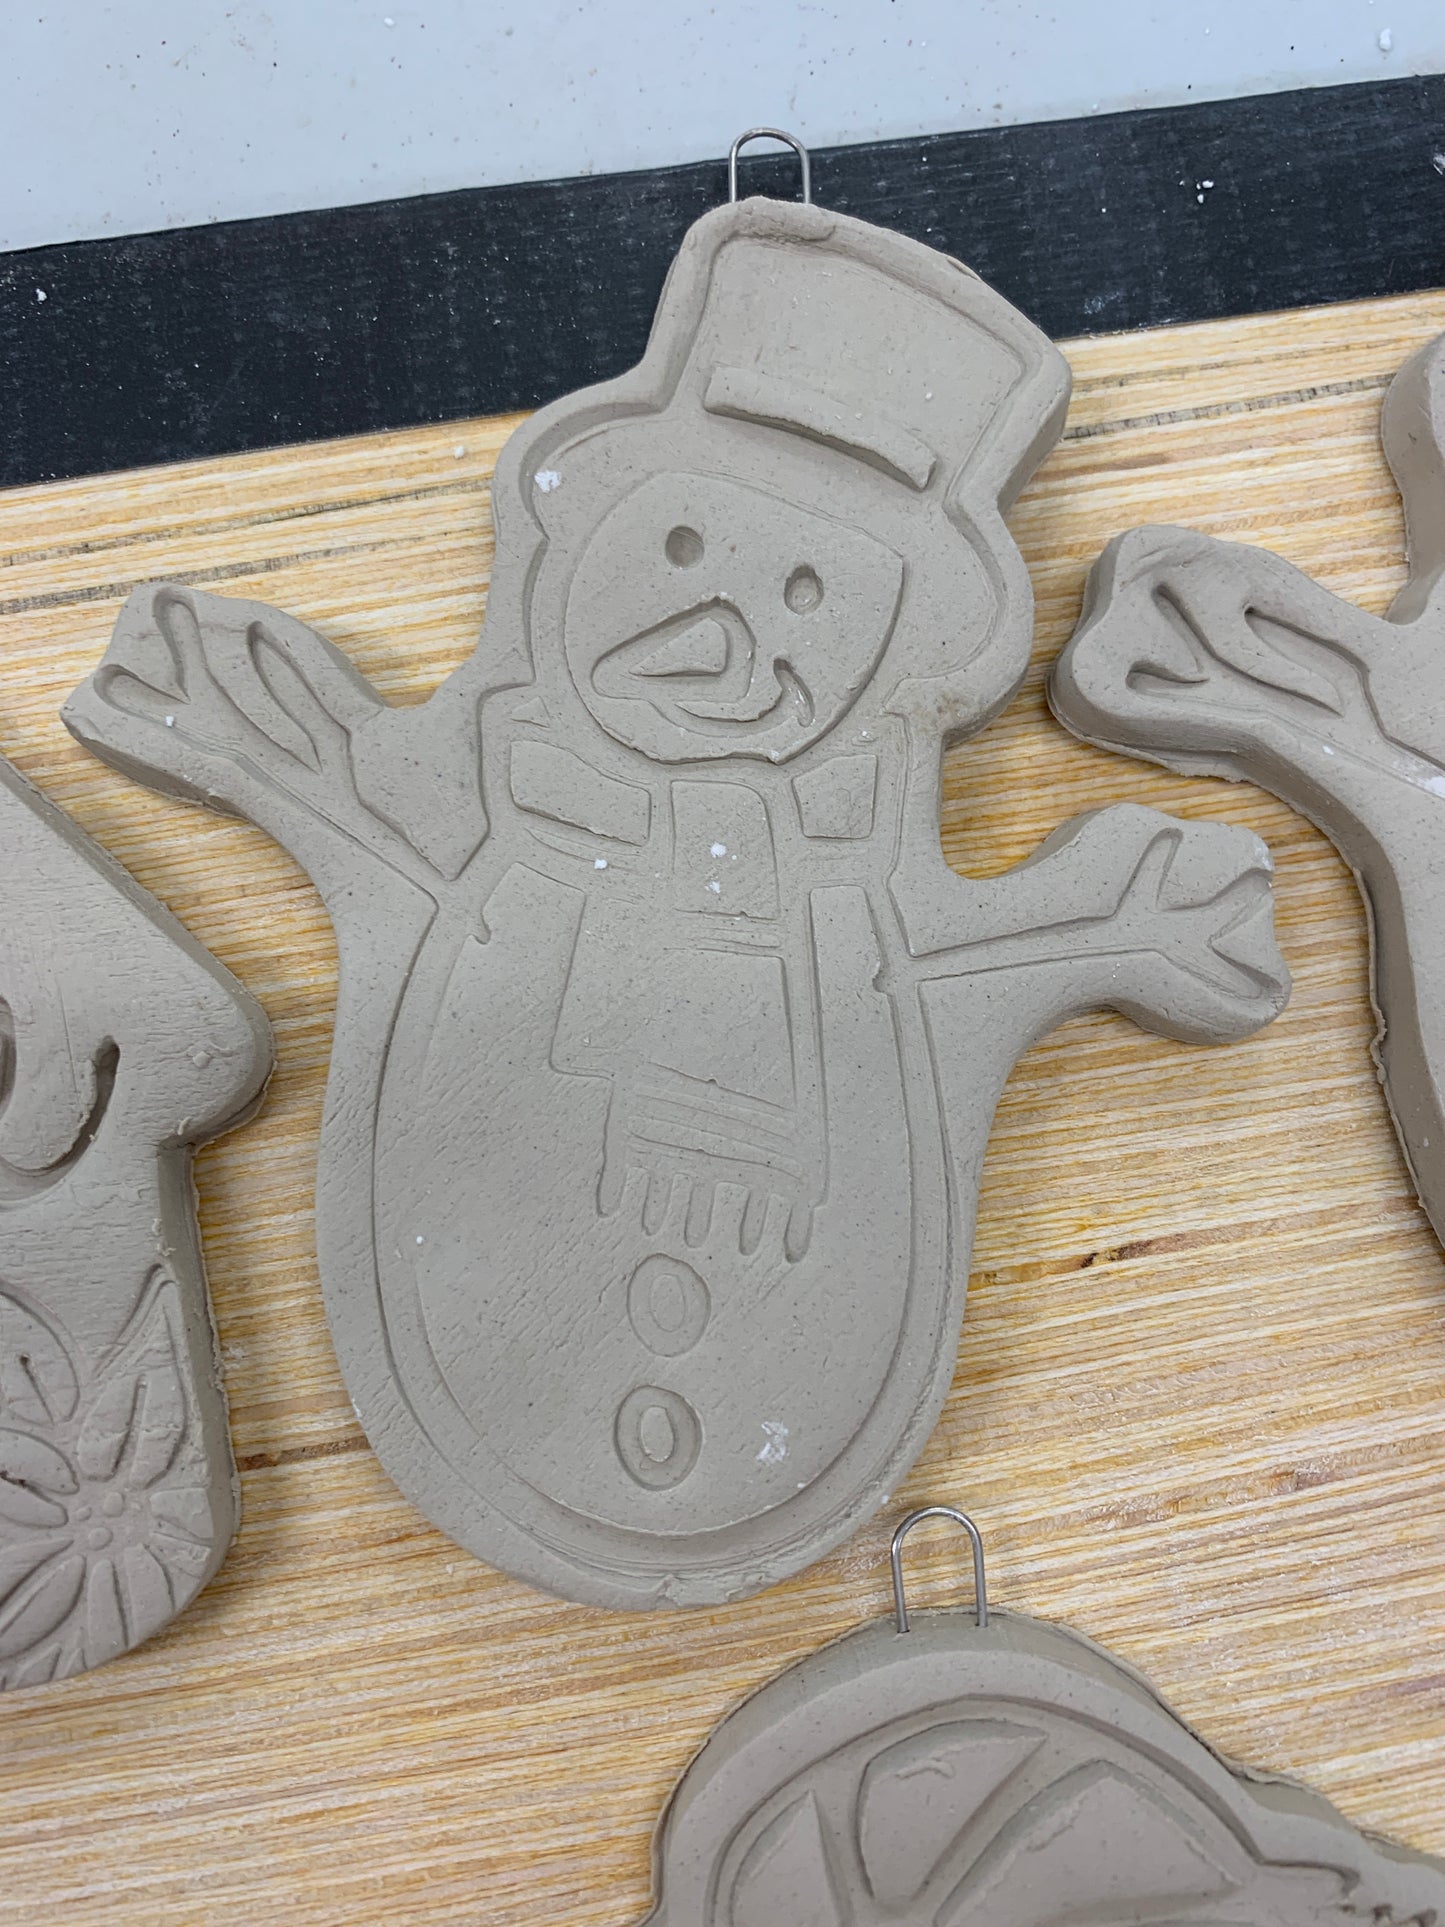 Pottery Stamp, Snowman design - multiple sizes